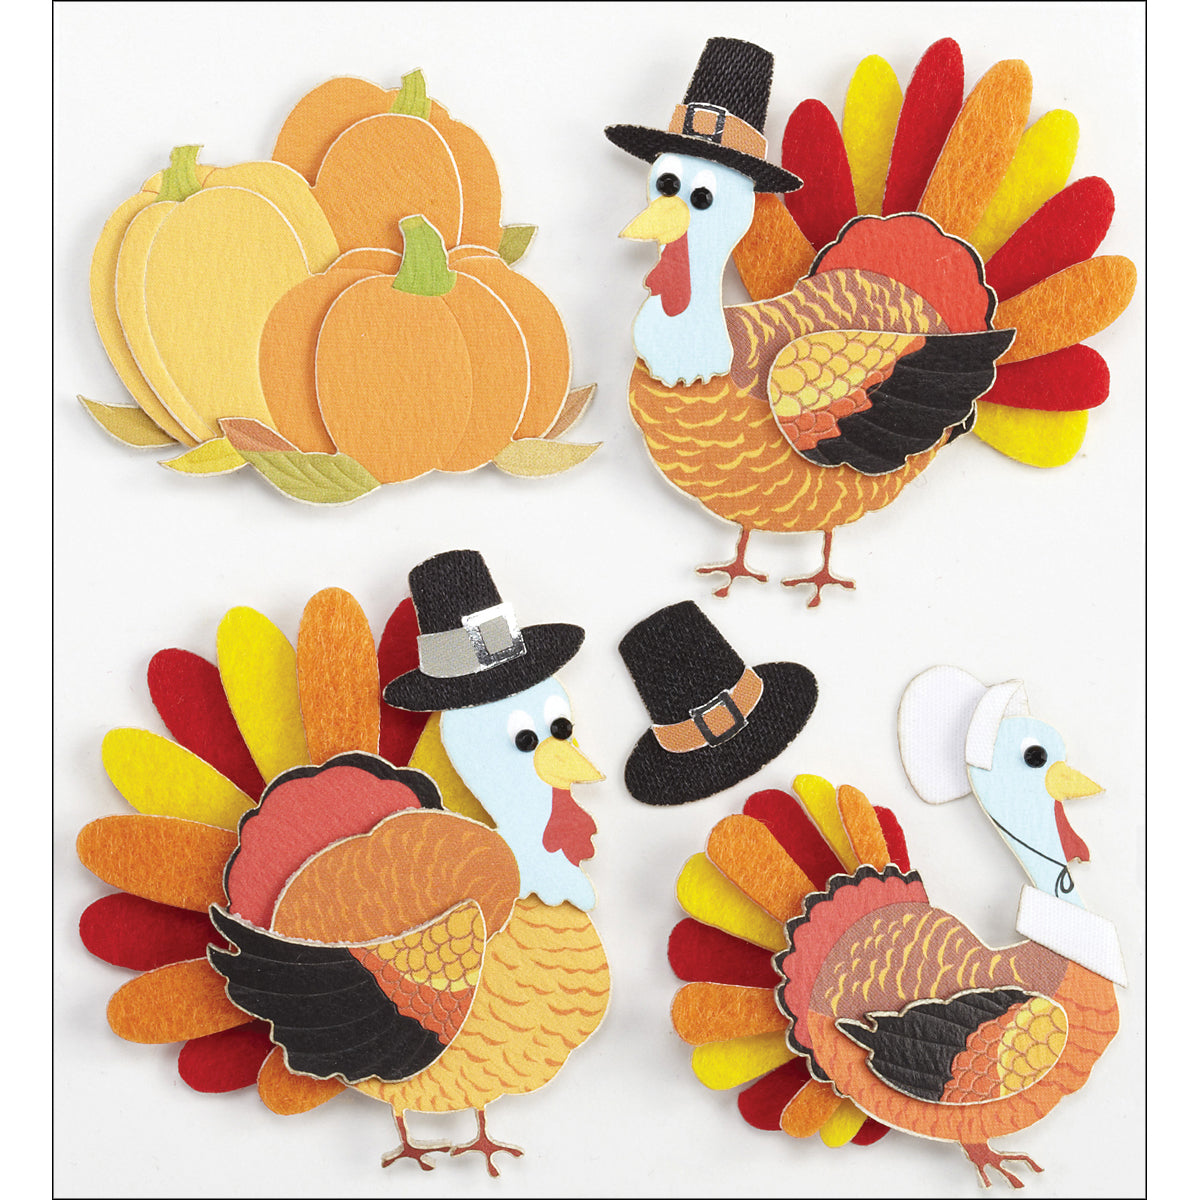 Jolee's Boutique Dimensional Stickers-Turkey Characters